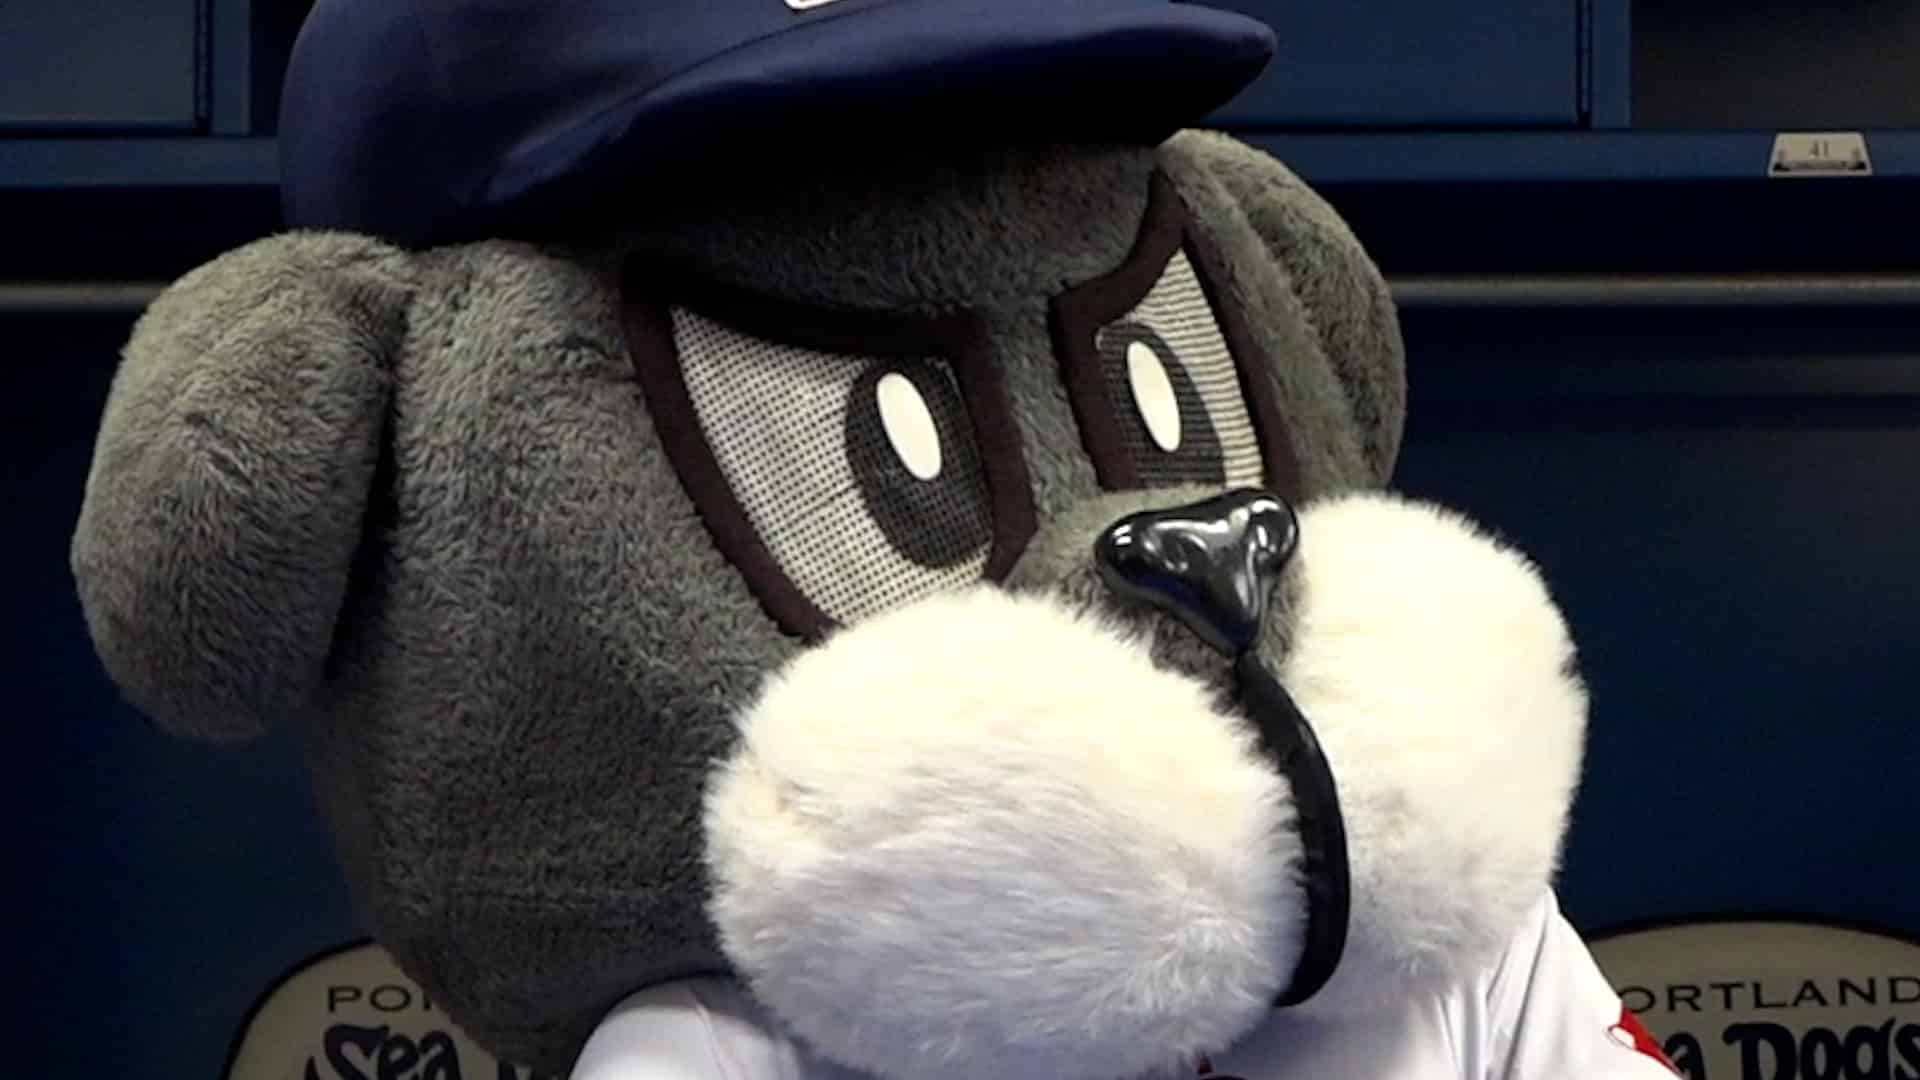 Look out Slapshot, you may have some competition as Caps' mascot